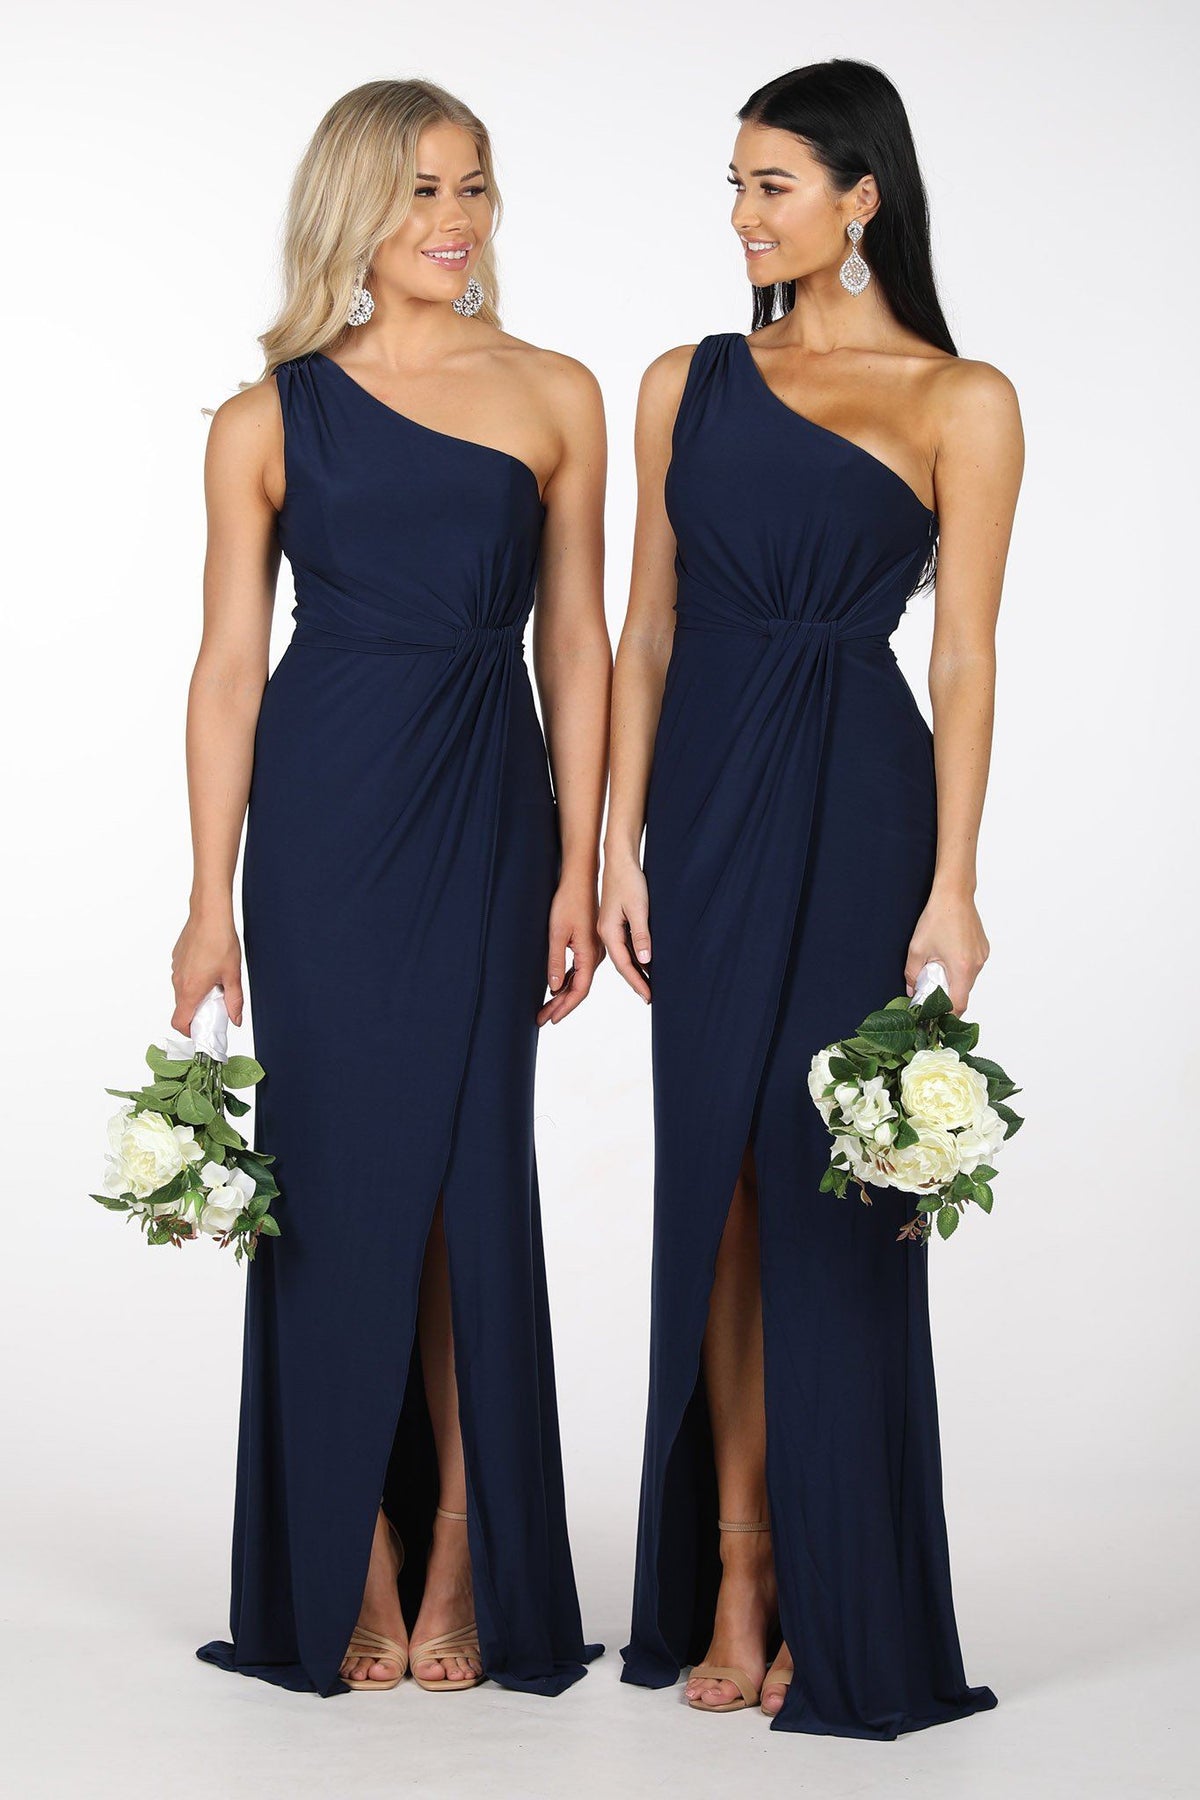 Bridesmaids in Deep Navy Blue One Shoulder Full Length Formal Dress with Asymmetrical One Shoulder Neckline, Ruched Waist, Above Knee High Slit, and a Column Styled Silhouette